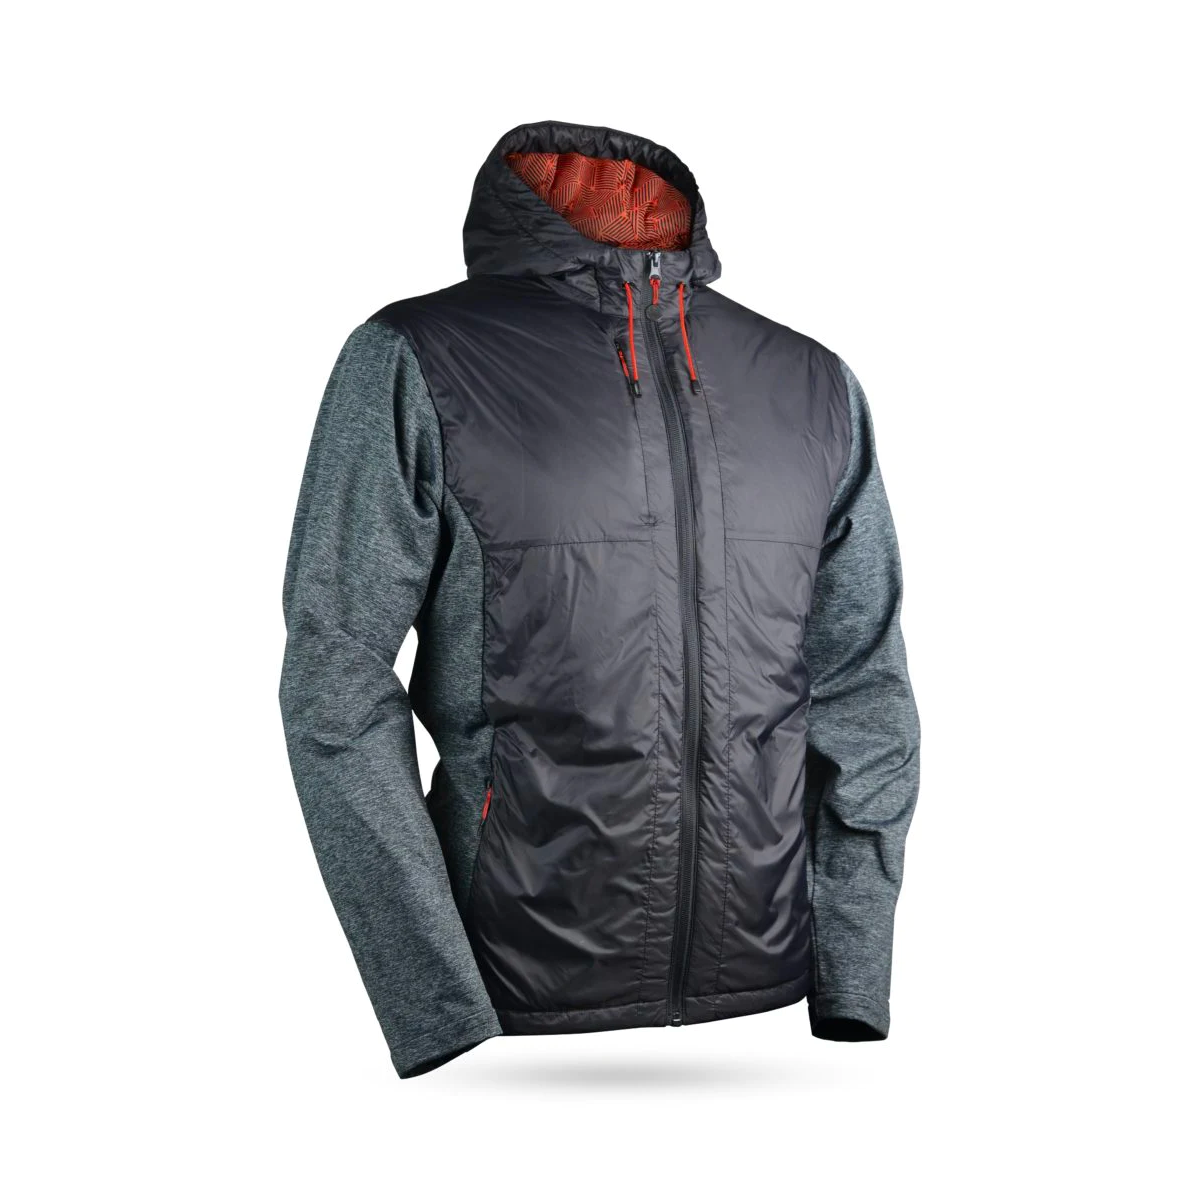 New Styles Added to Colter Thermal Golf Outerwear Collection